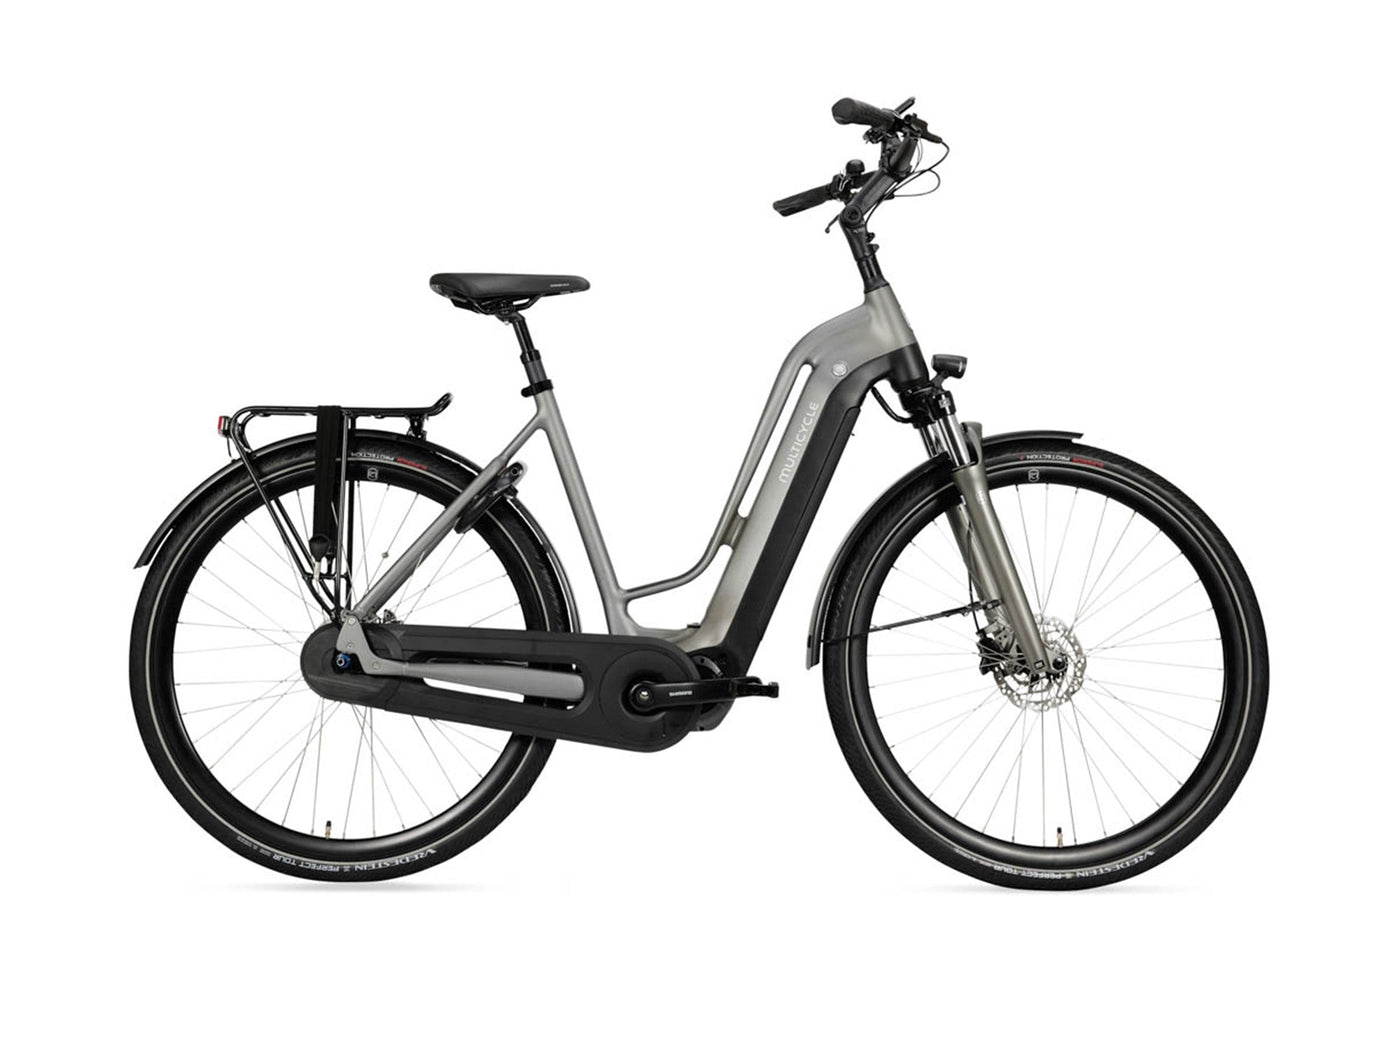 MULTICYCLE VOYAGE EMI 500wh Step Through